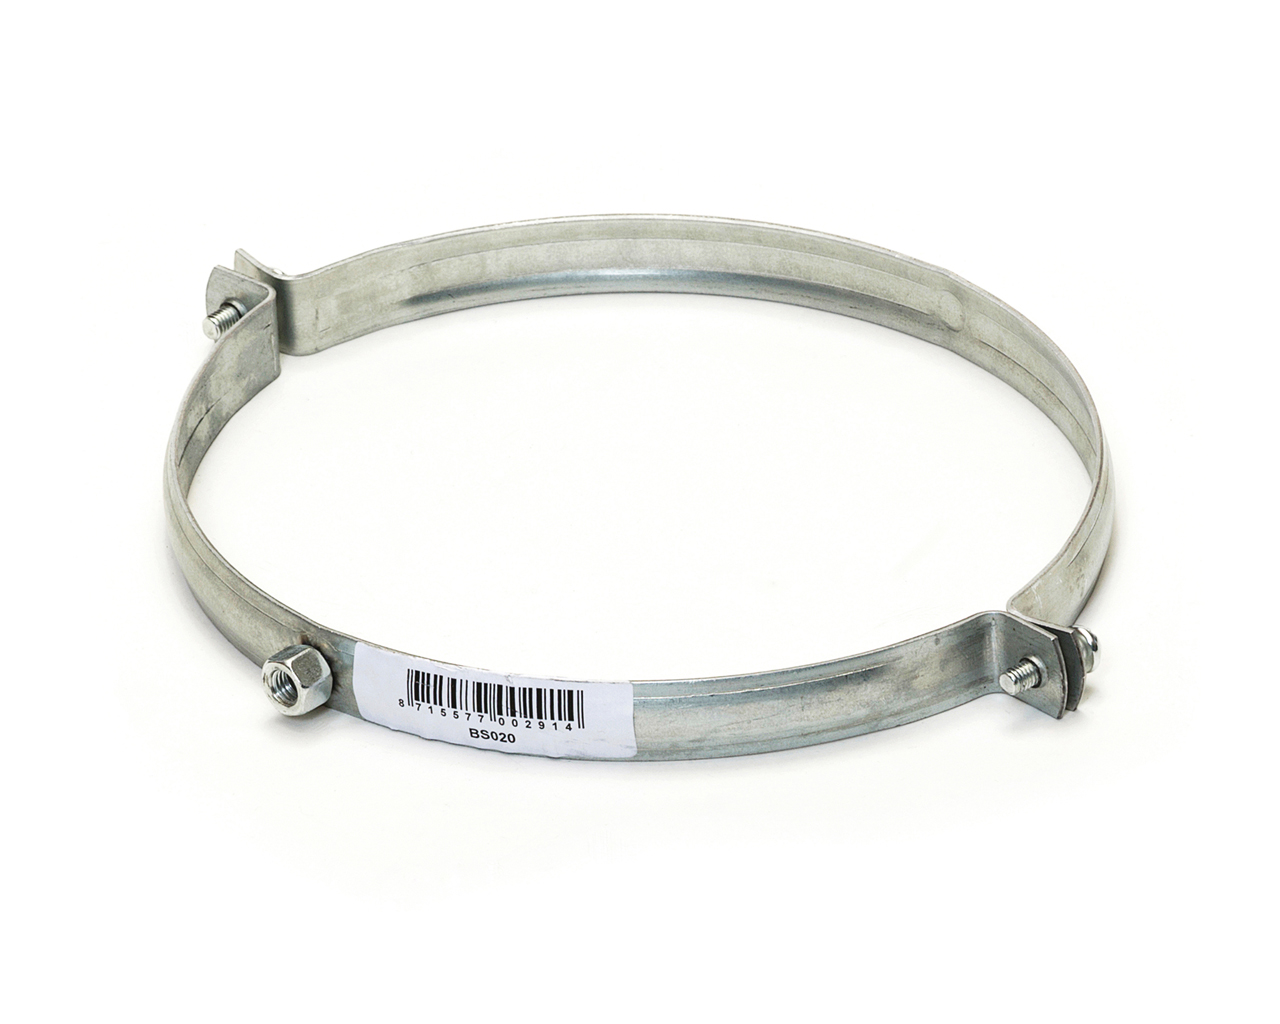 BS008 Suspension ring M8 (BS) The BS Suspension ring M8 has a galvanised steel suspension ring with one welded nut at the centre of one segment of the suspension ring M8 (8 mm).